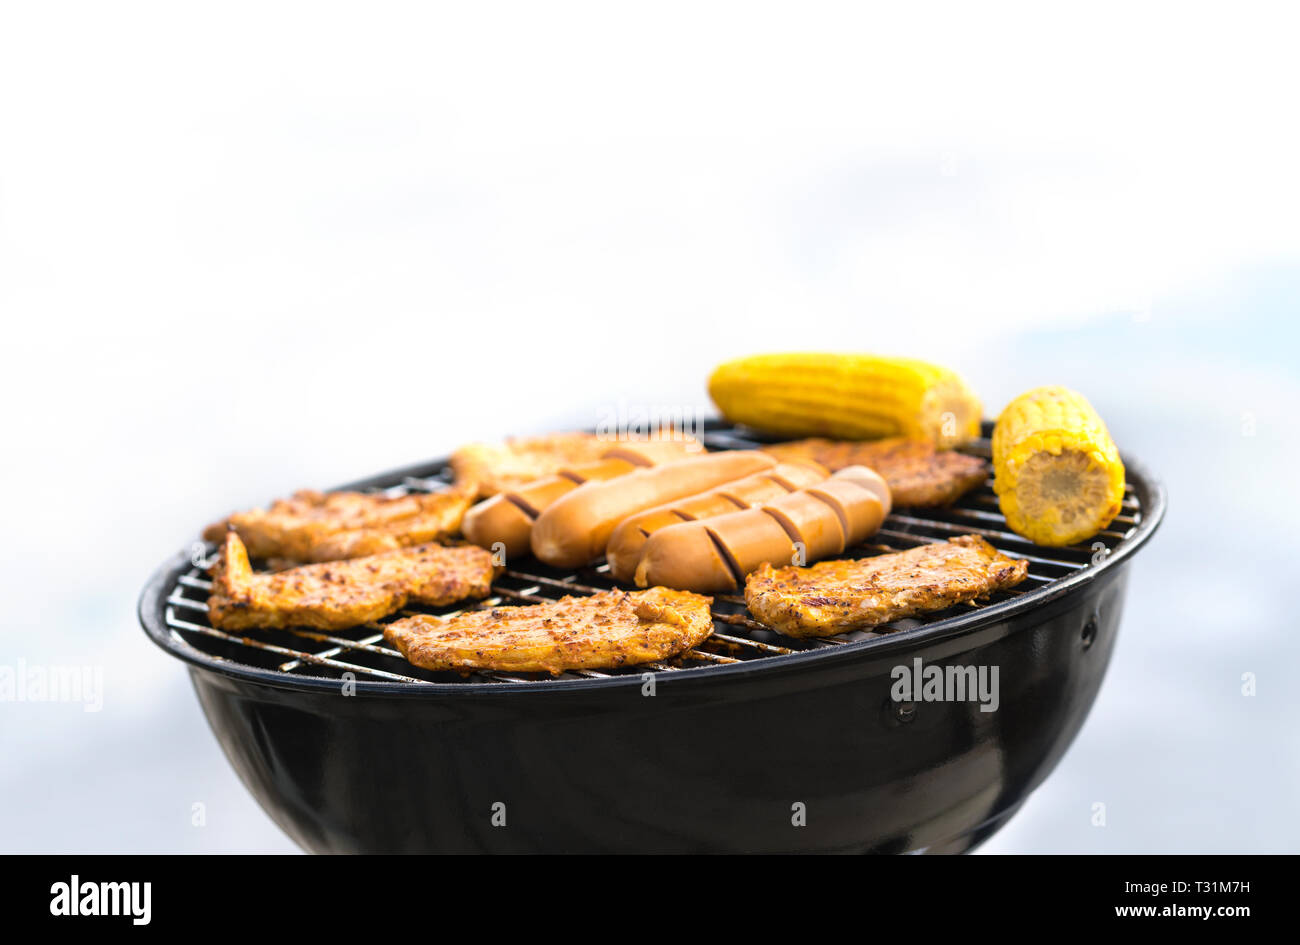 Grill with sausages, meat and corn. Outdoor grilling and barbeque. BBQ party, cookout or camping concept with negative copy space. Stock Photo